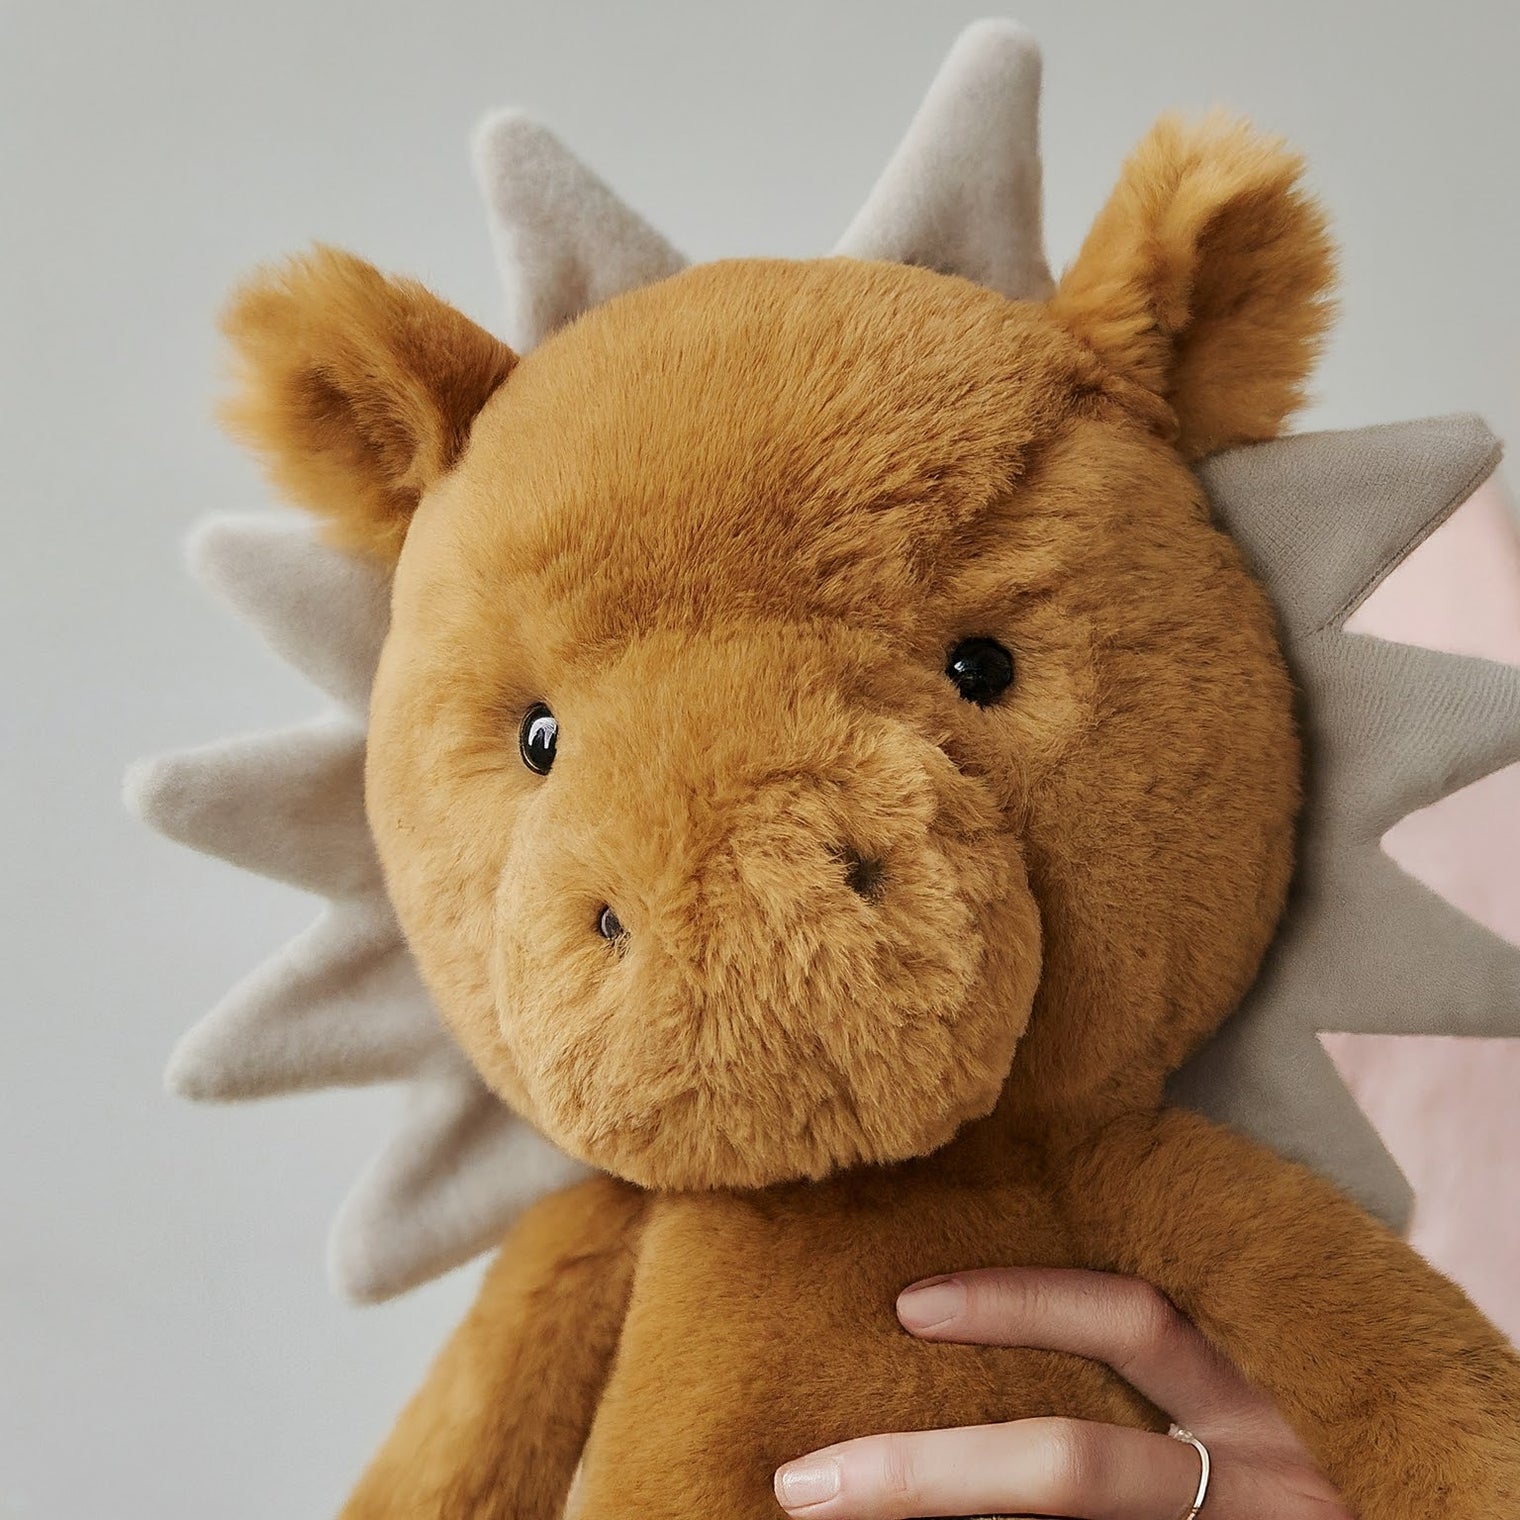 What's So Special About Jellycat?